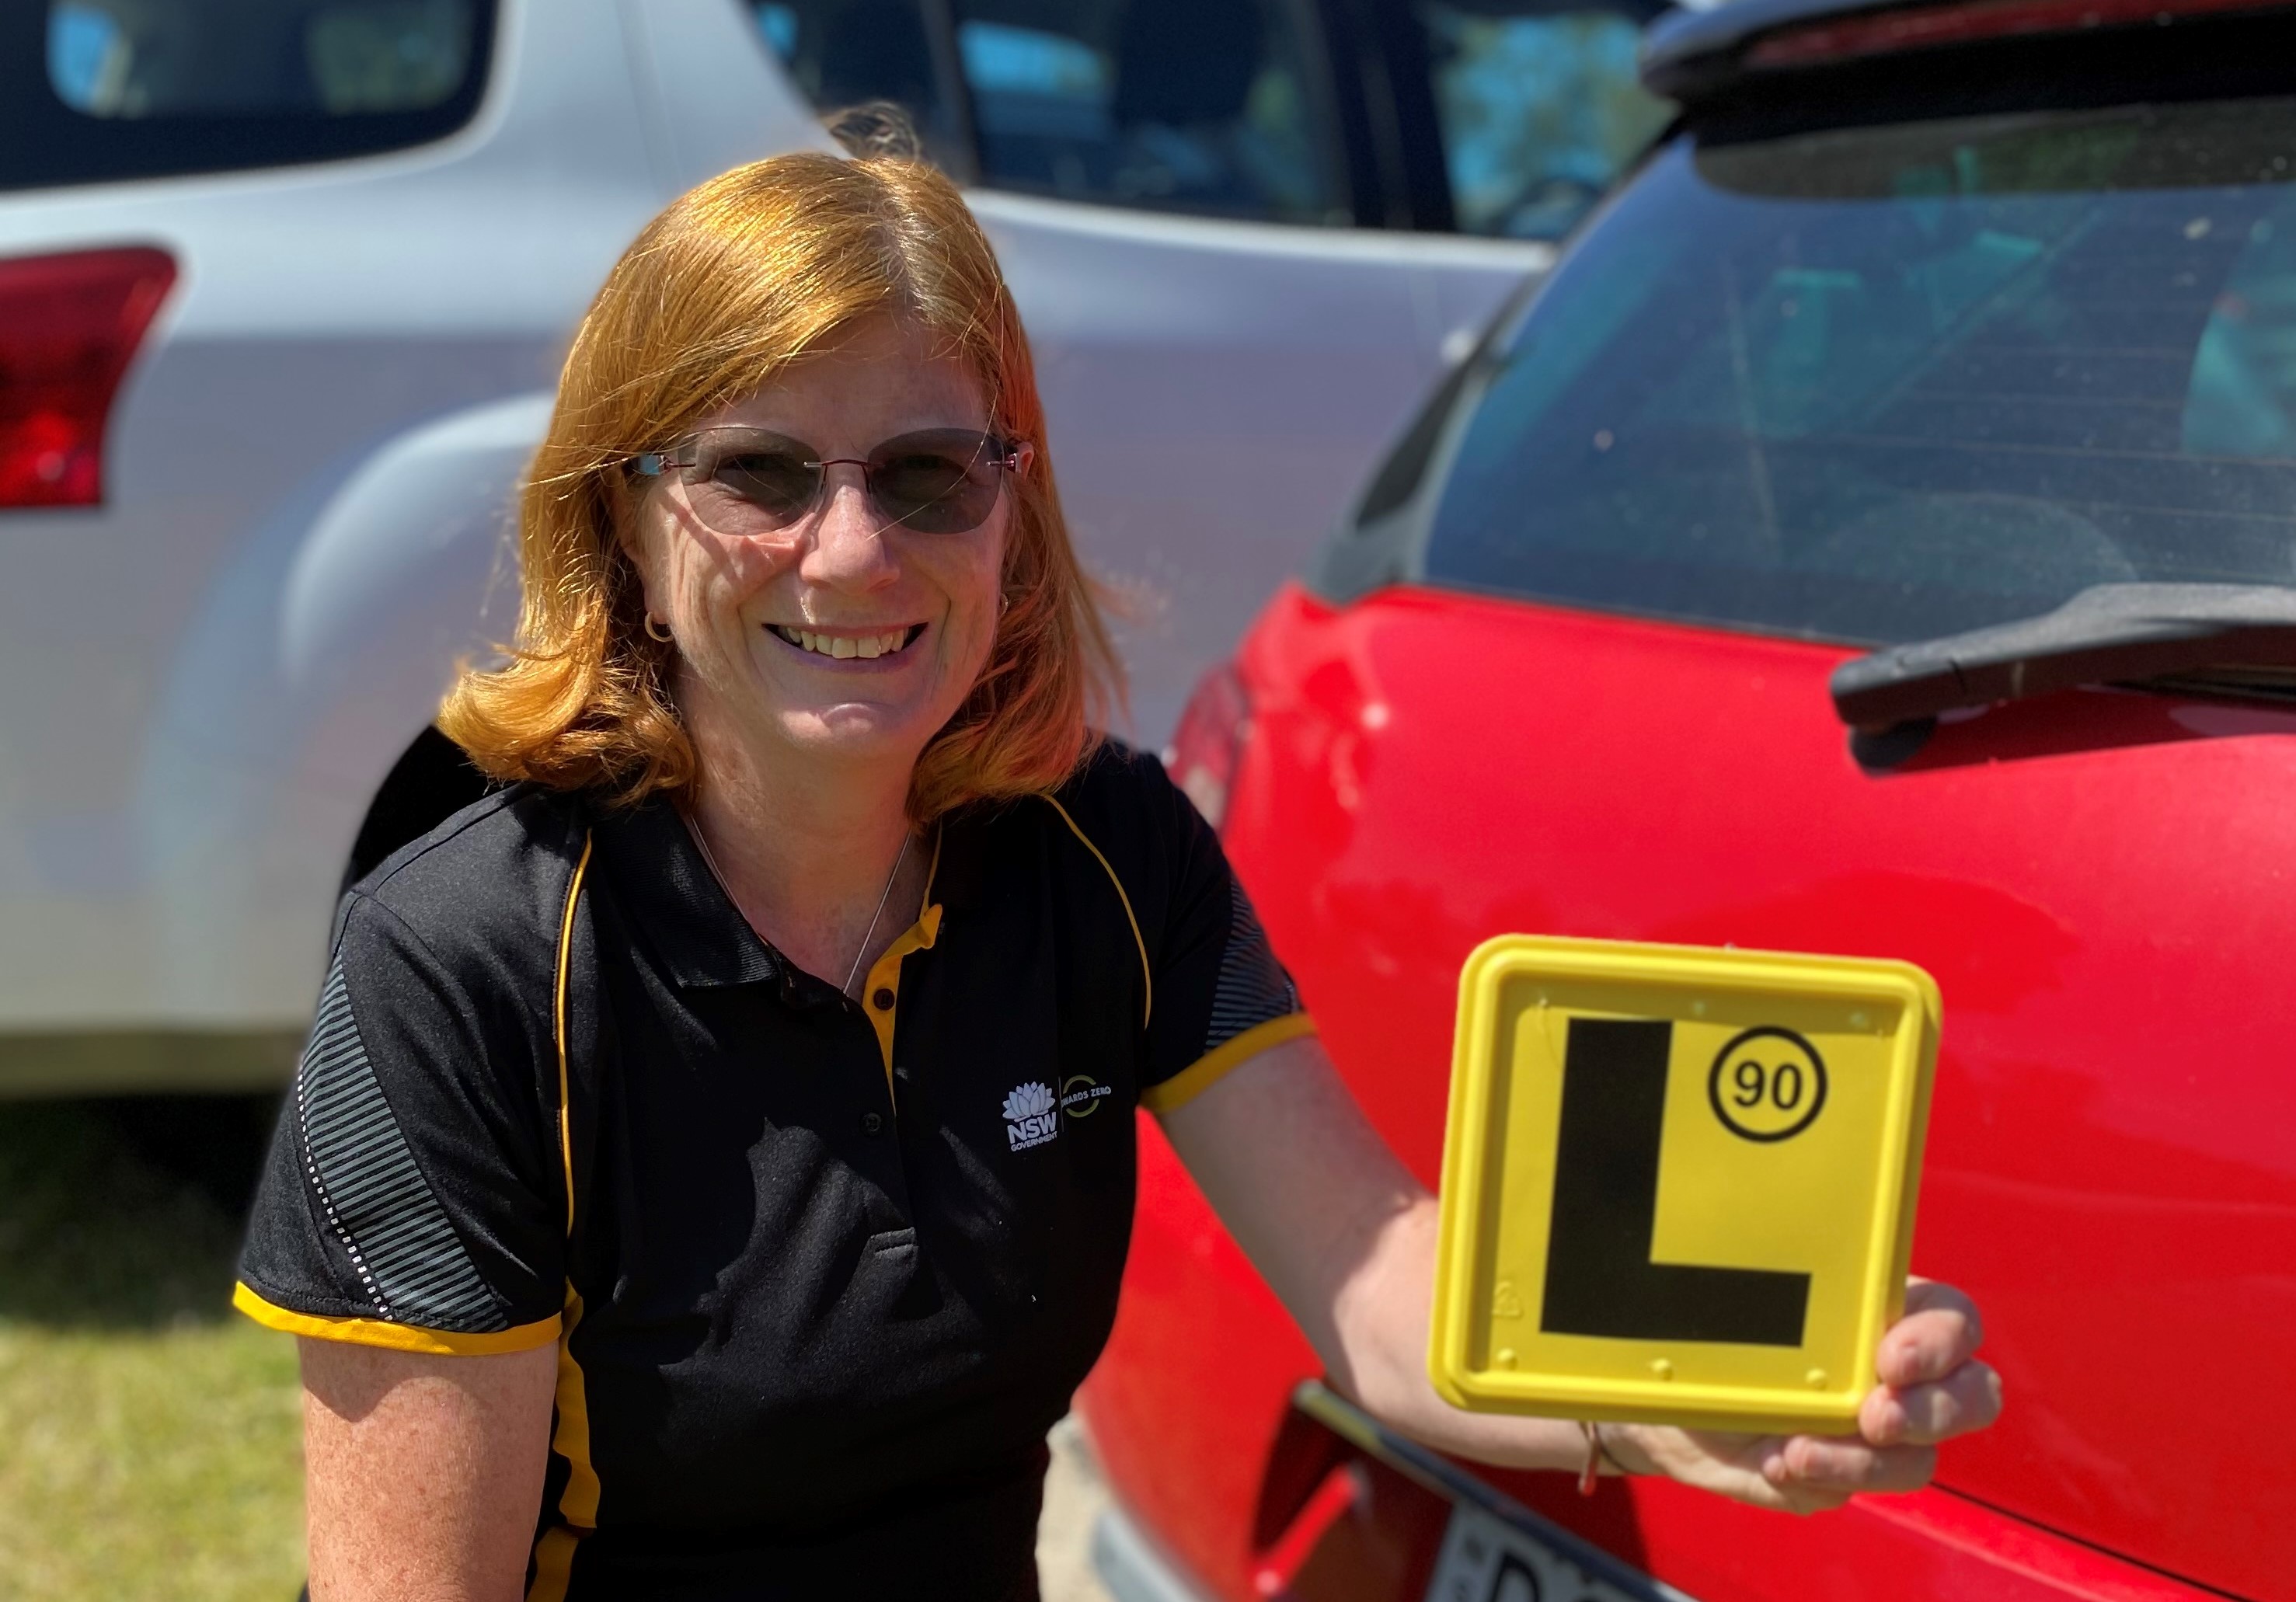 Moruya parents and carers workshop to help with learner driver instruction